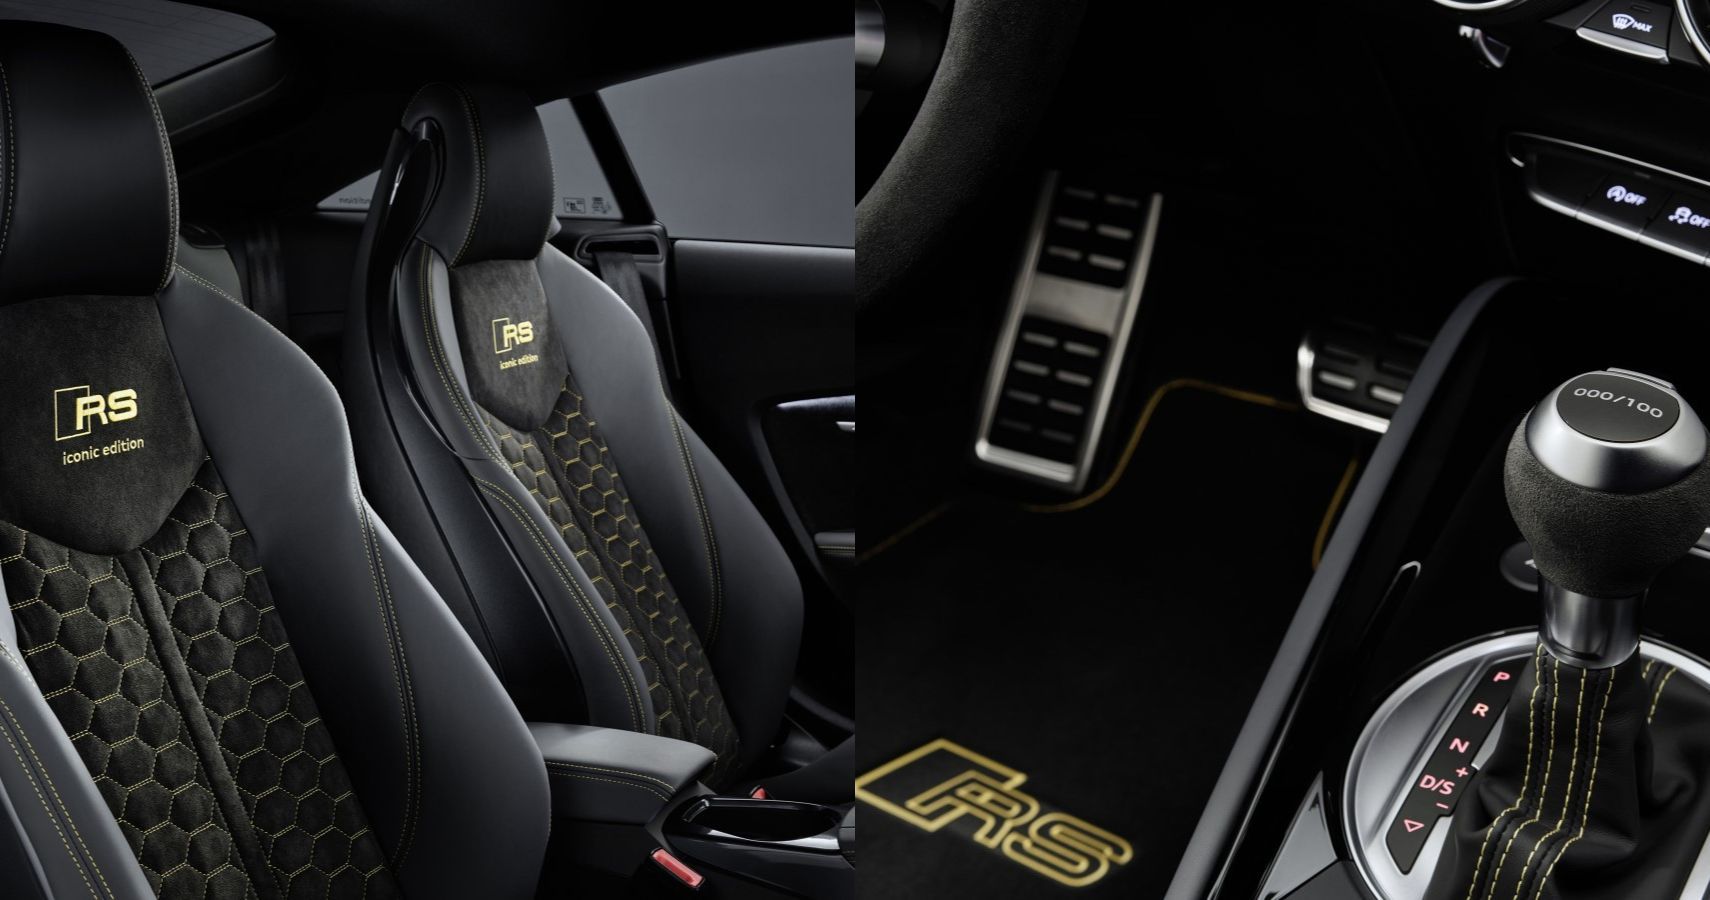 Audi TT RS Coupe Iconic Edition interior features close-up view